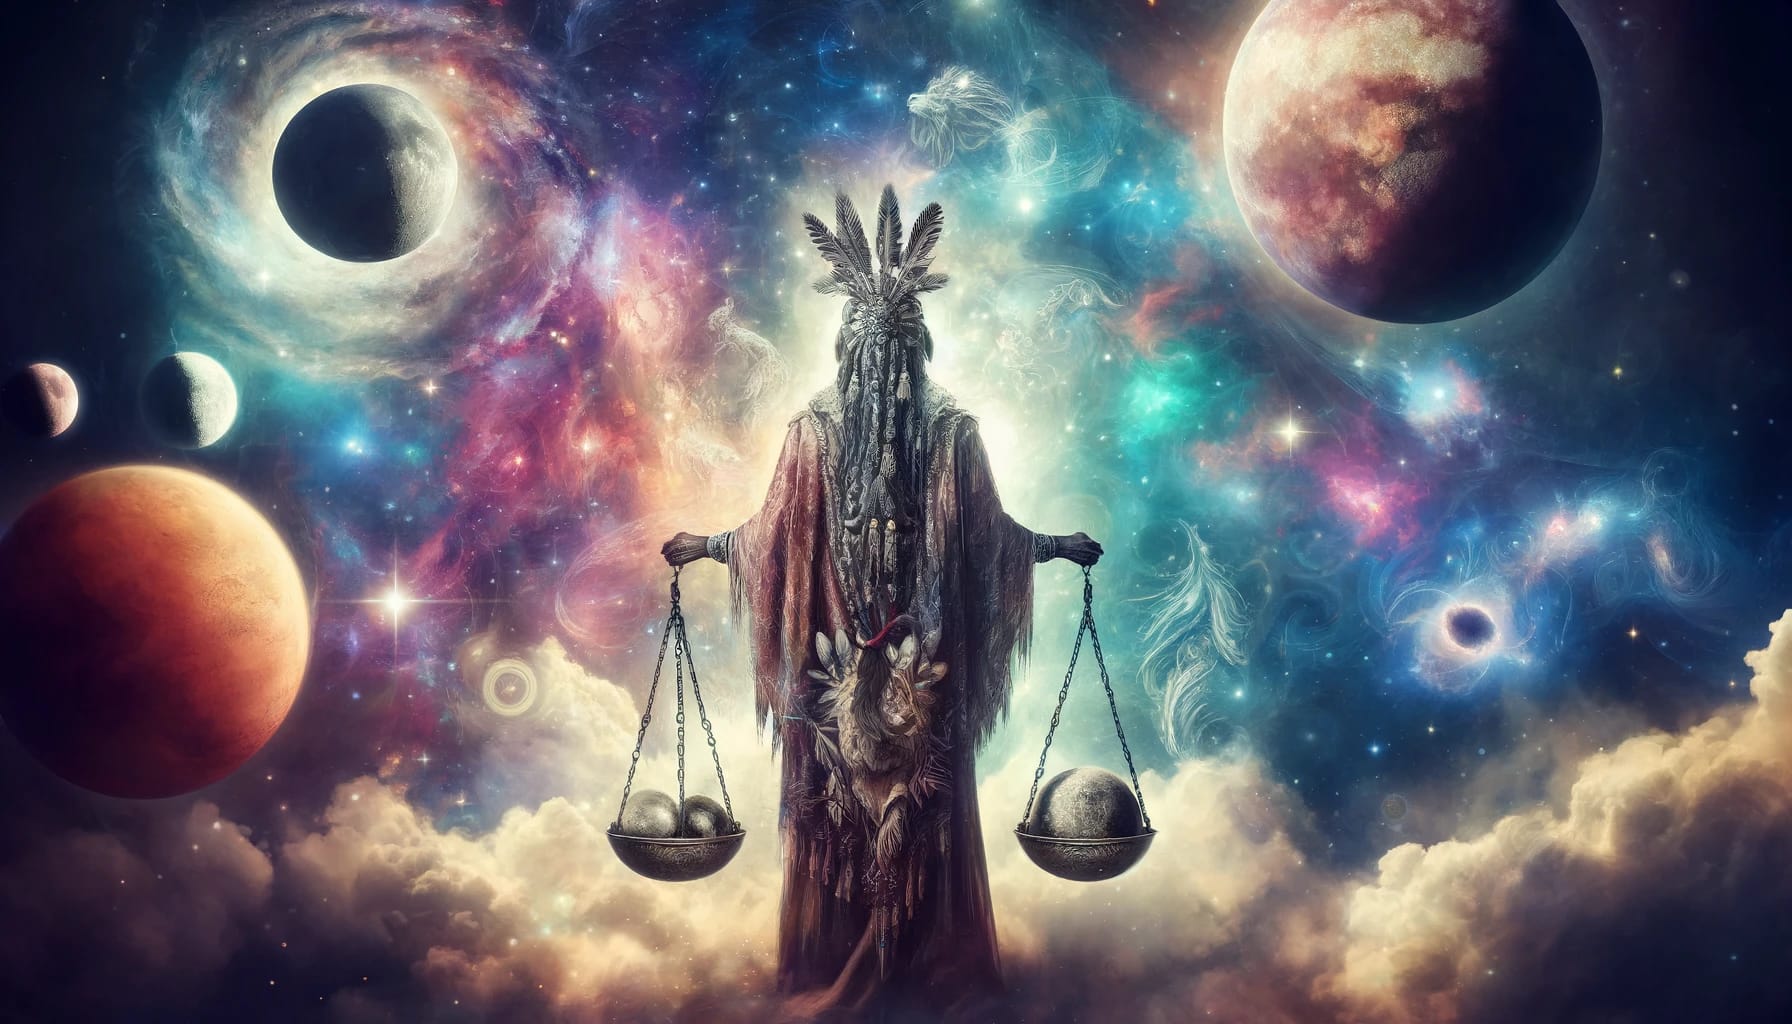 Podcast #89 Law & Order 2023: A Shamanic Perspective on Justice